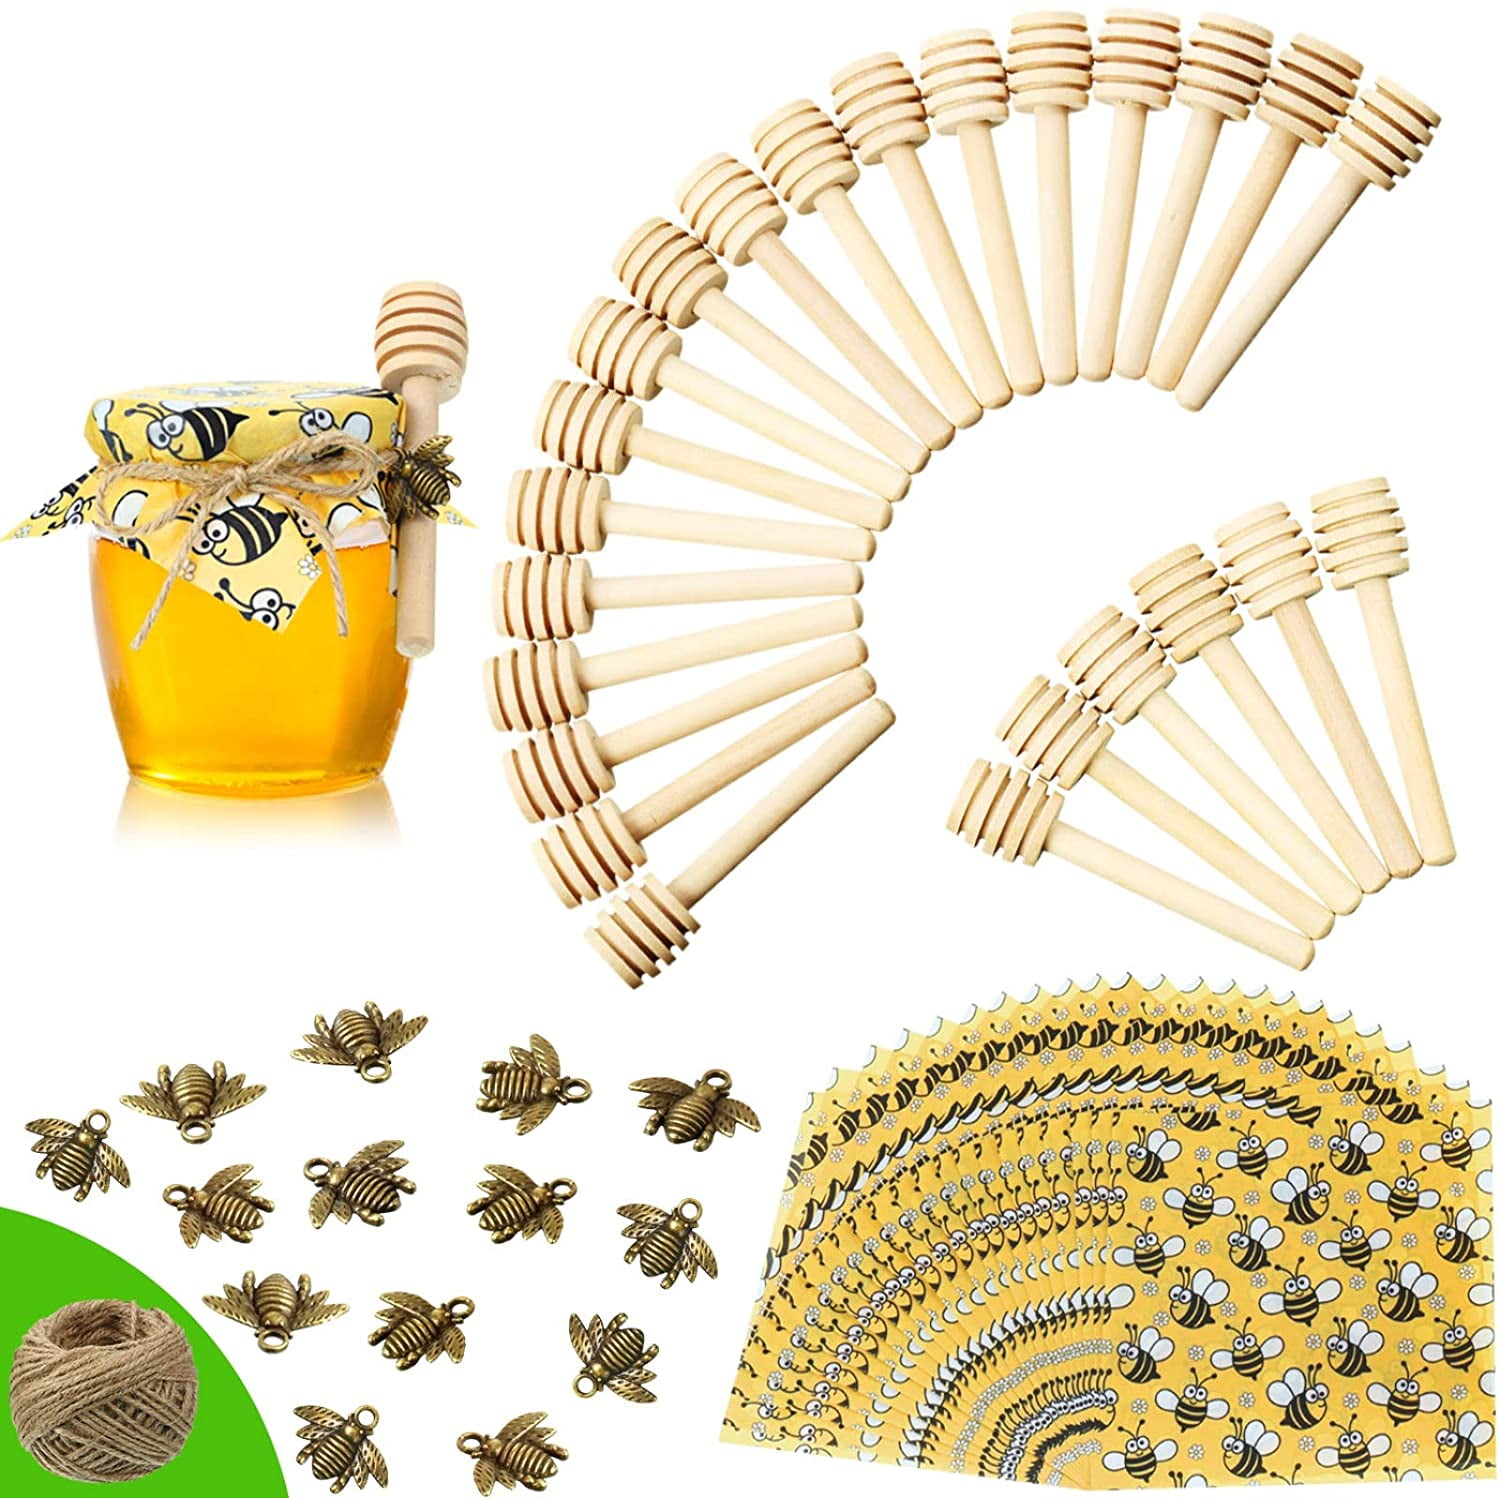 3 Inch Wooden Honey Dipper Sticks Set Honey Dipper Sticks Honeybee Charm Pendants Decorative Bee Wrapping Paper with Jute Hanging Rope for Honey Jar DIY Crafts 73 Pieces 